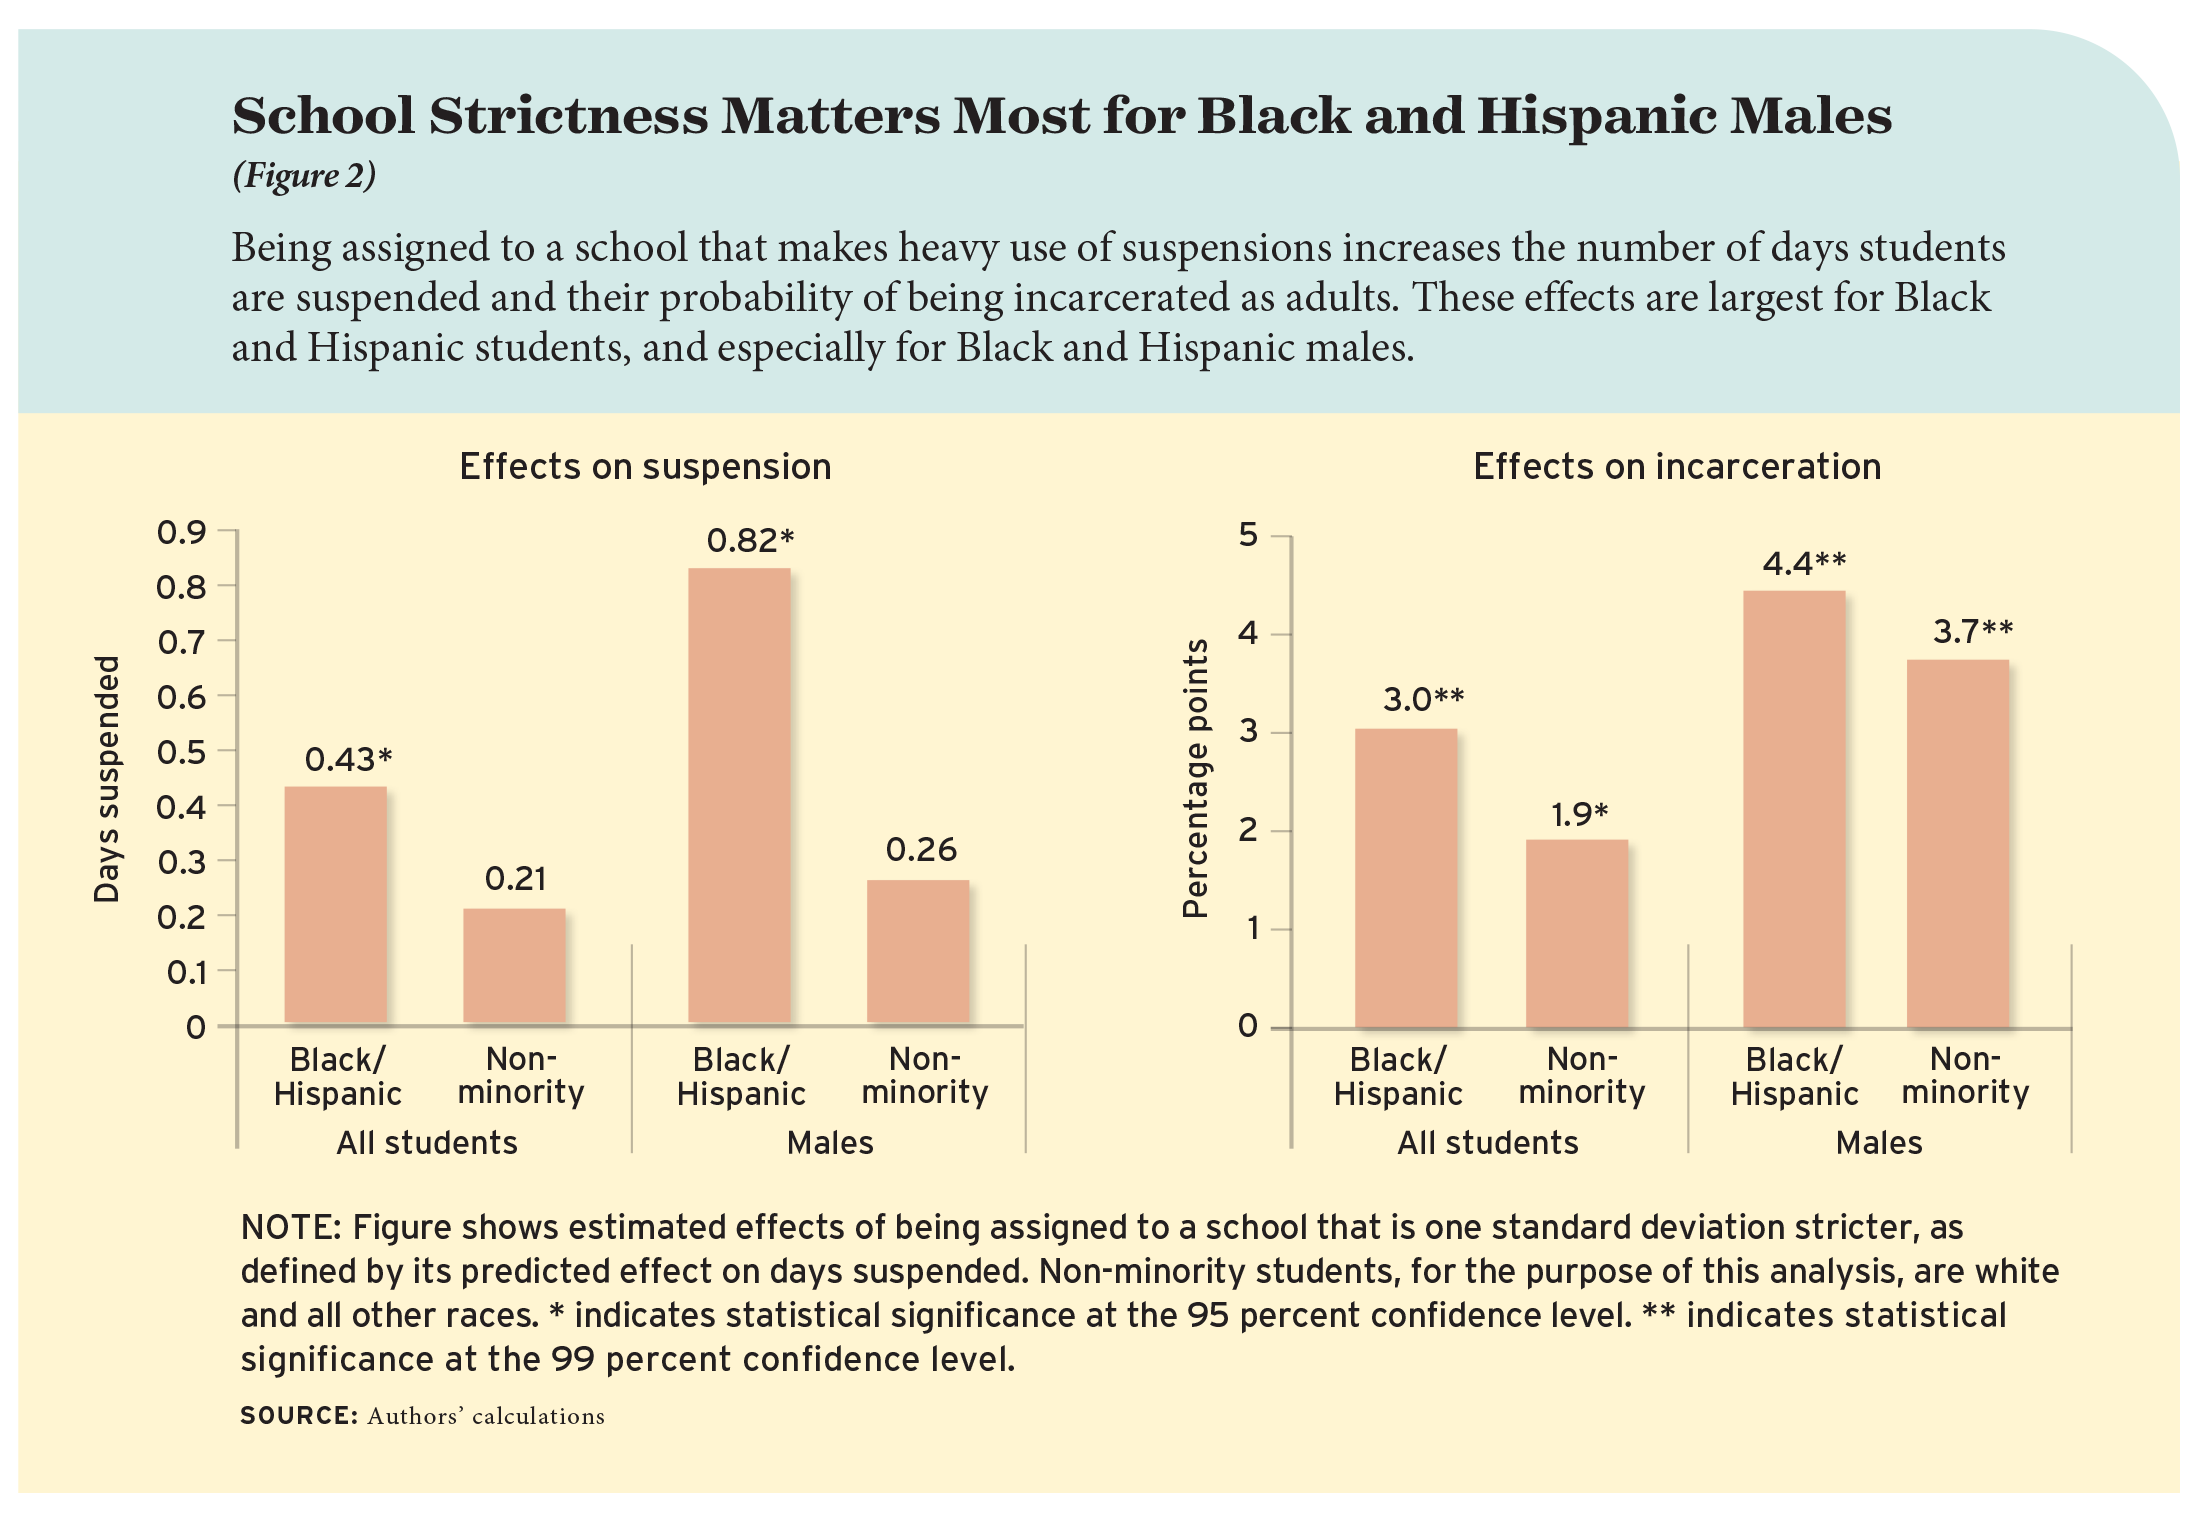 Figure 2: School Strictness Matters Most for Black and Hispanic Males